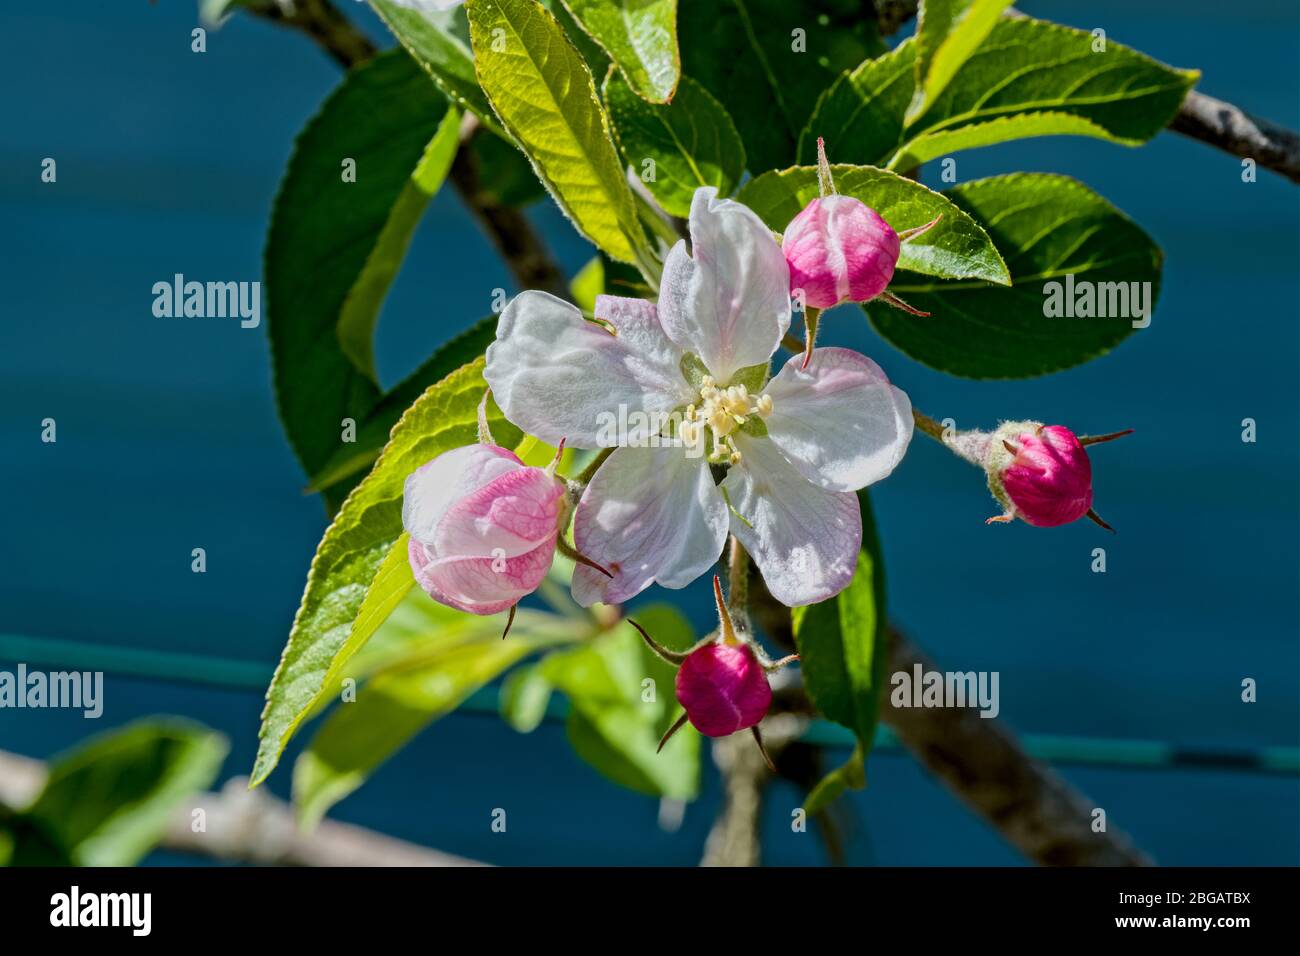 Apple blossom and buds Stock Photo